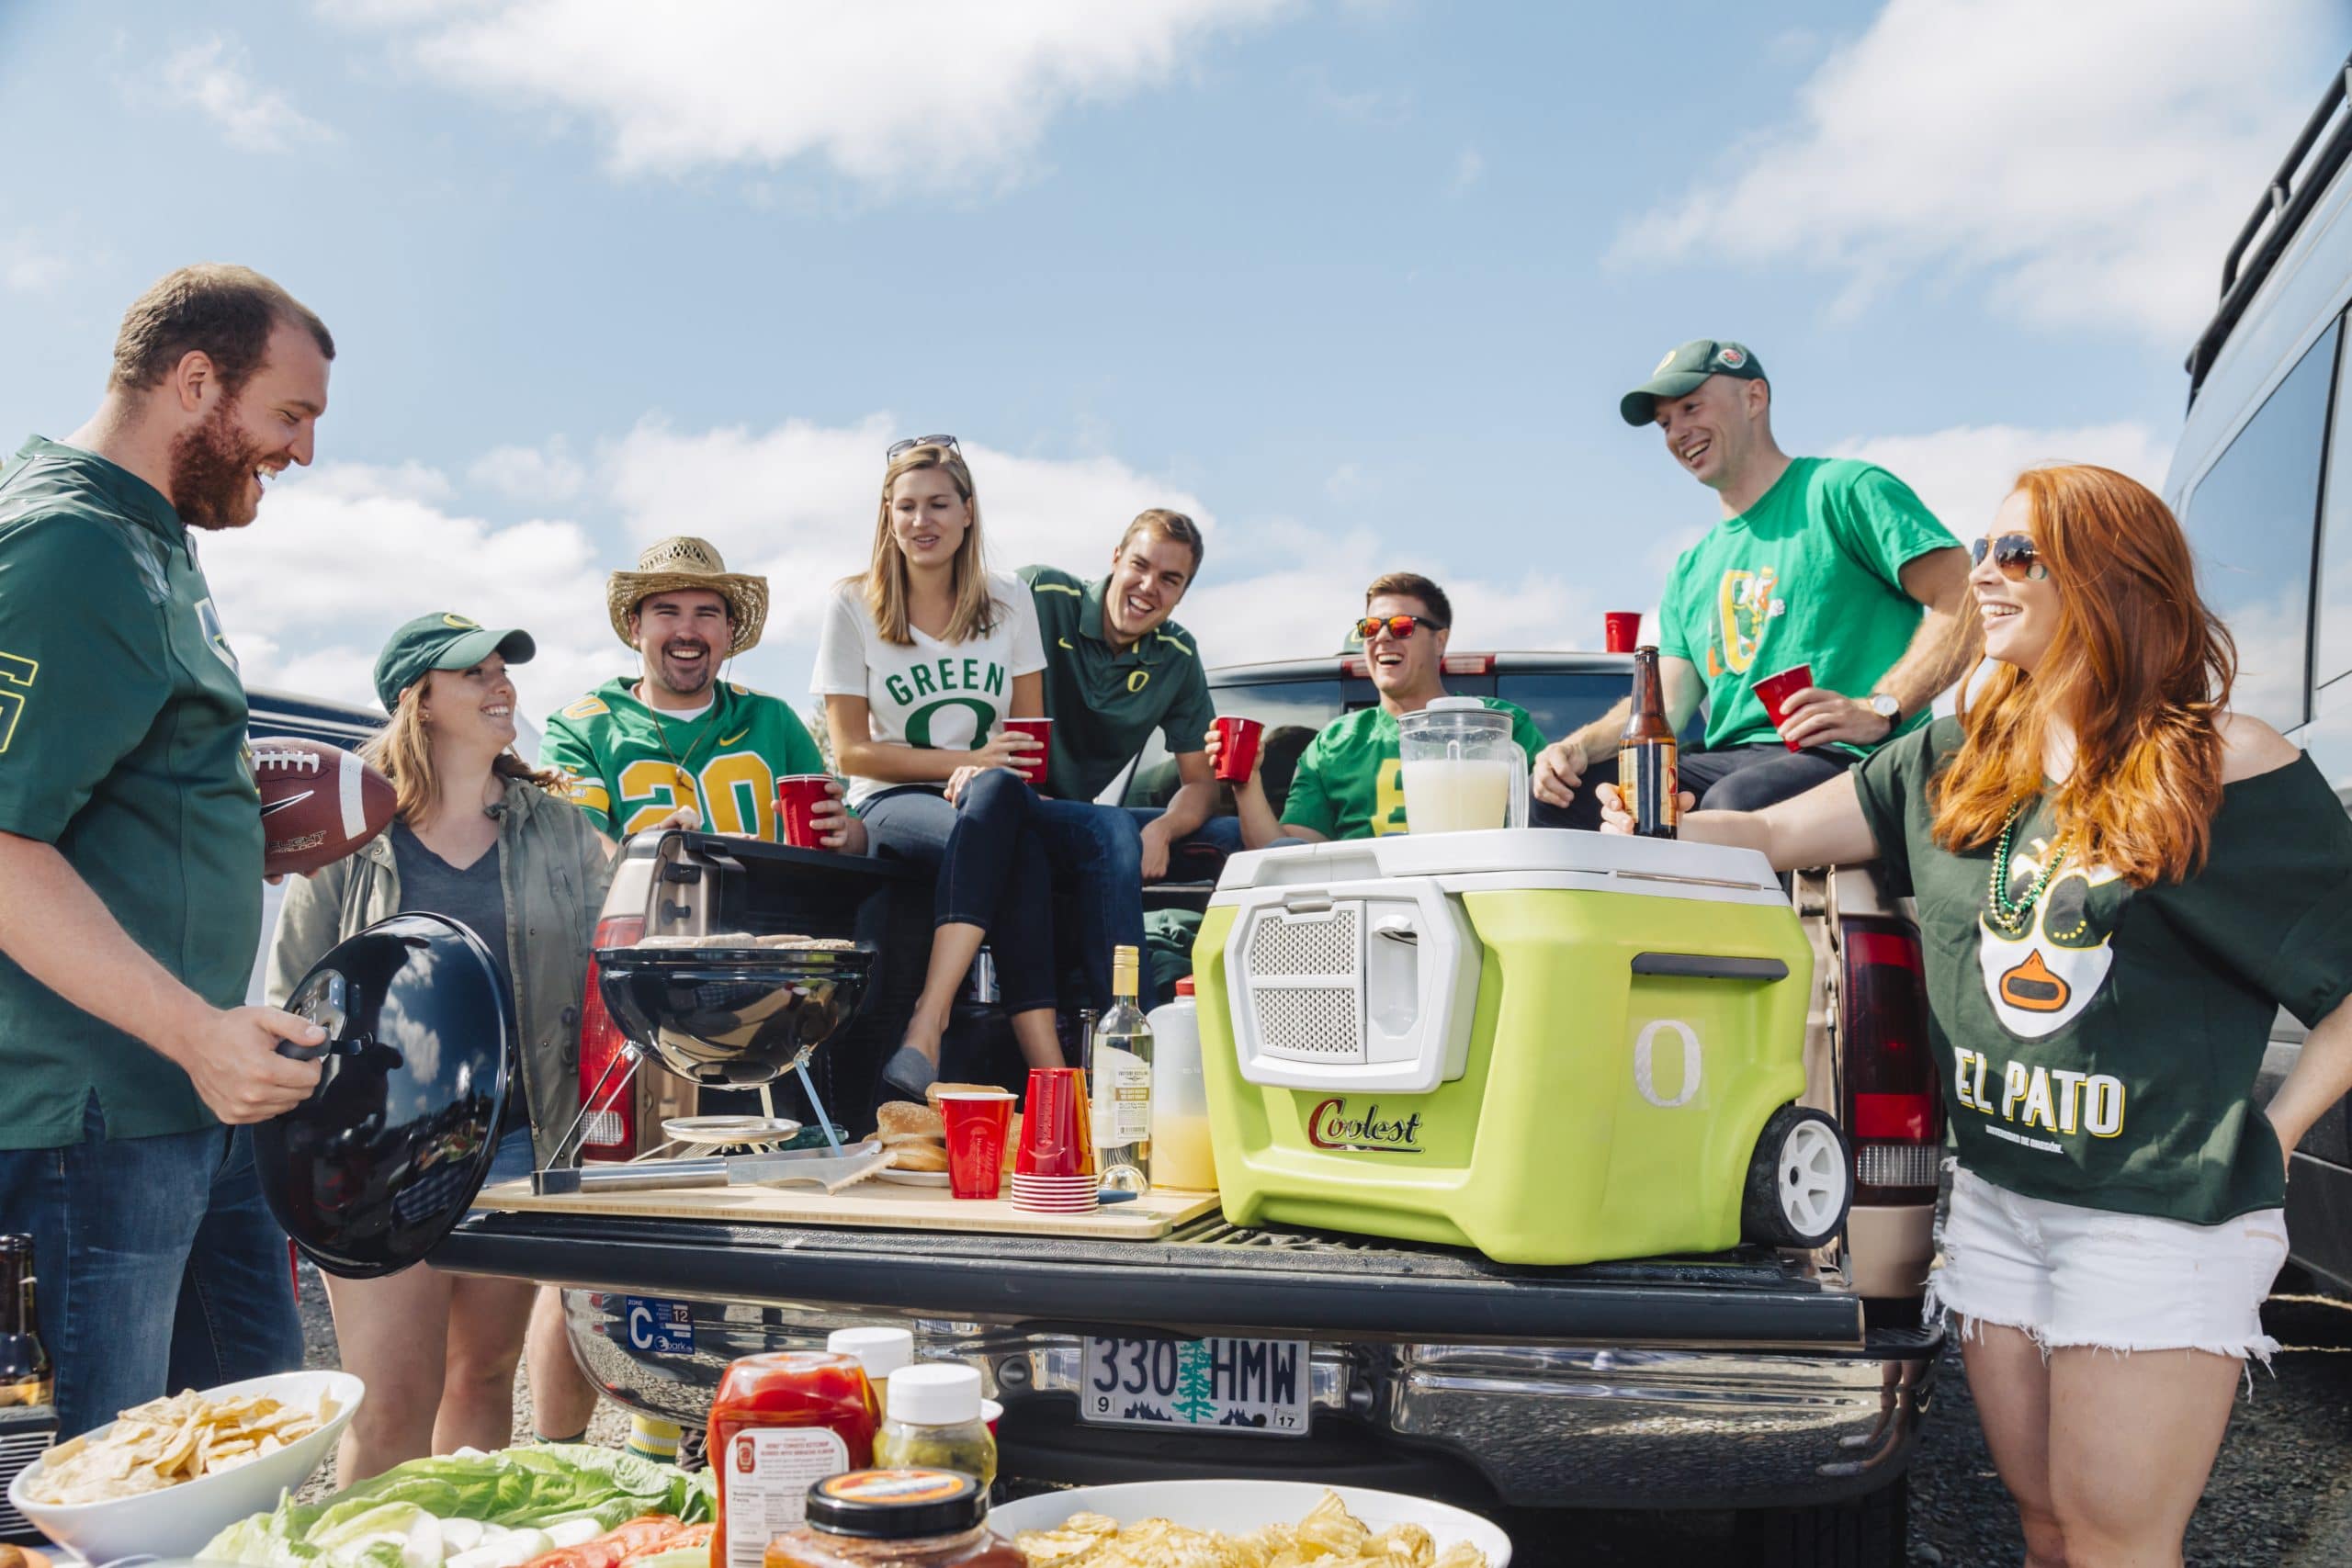 Coolest cooler tailgate party